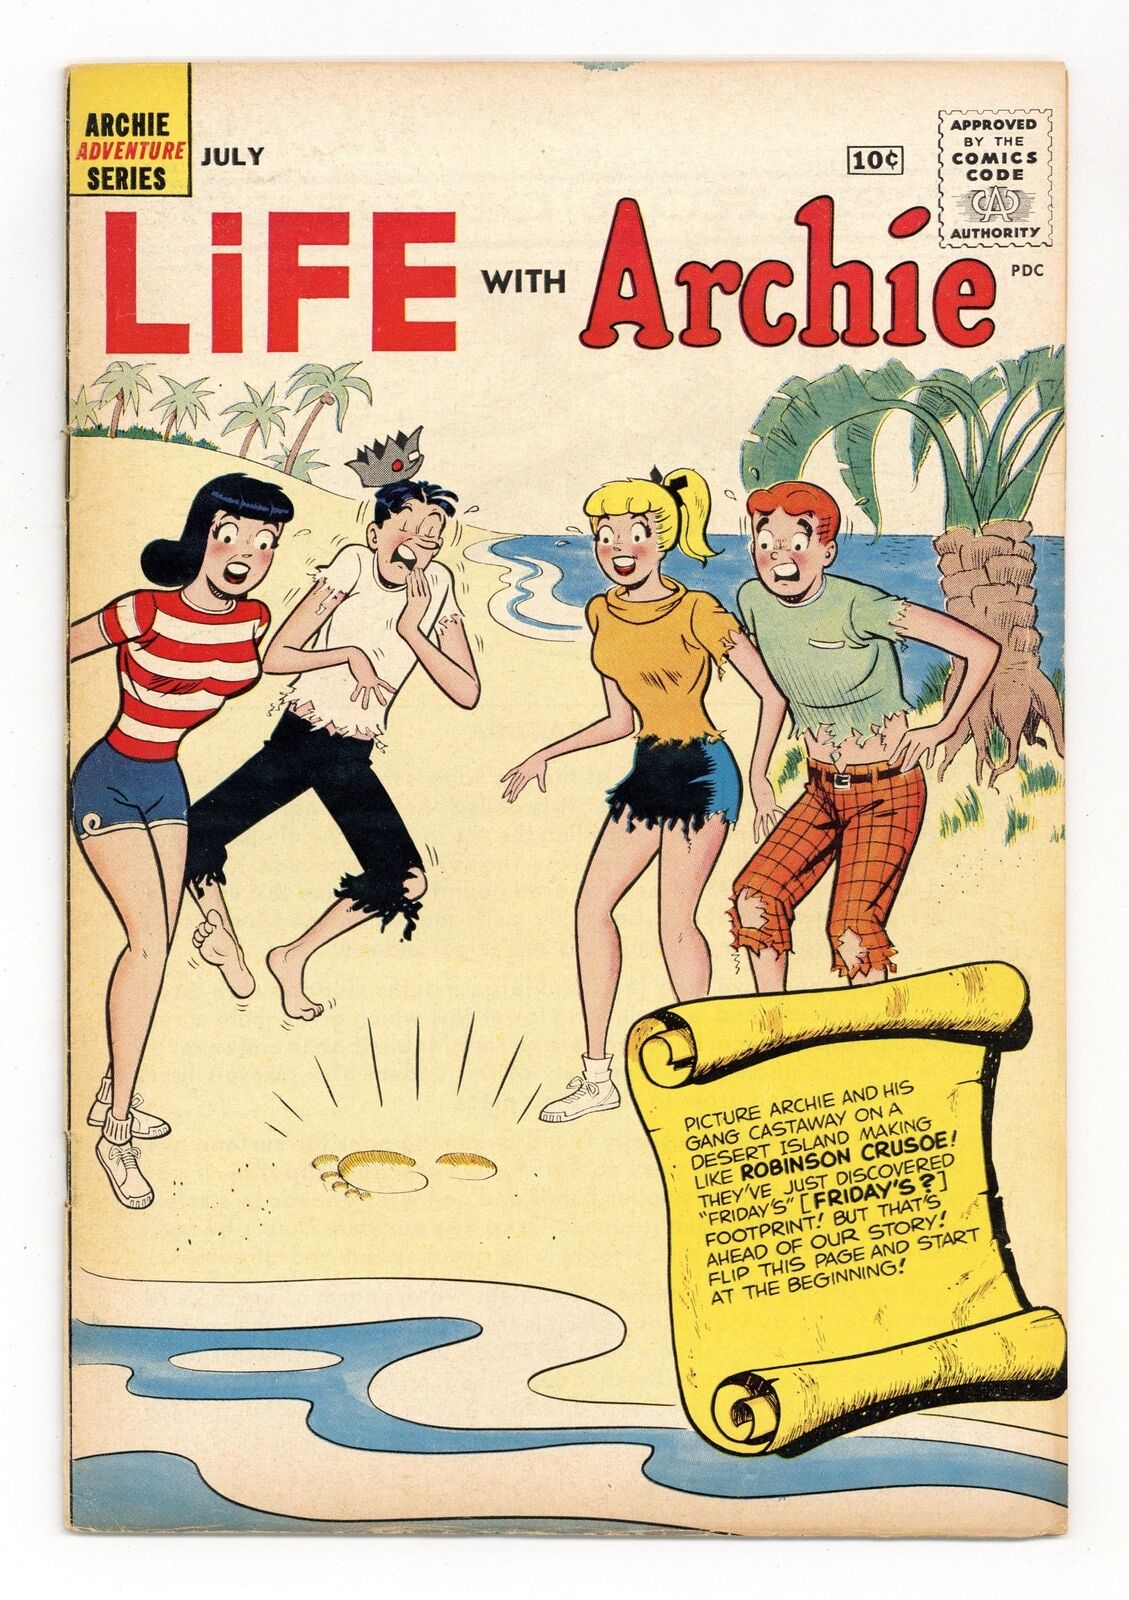 Life with Archie #3 VG/FN 5.0 1960